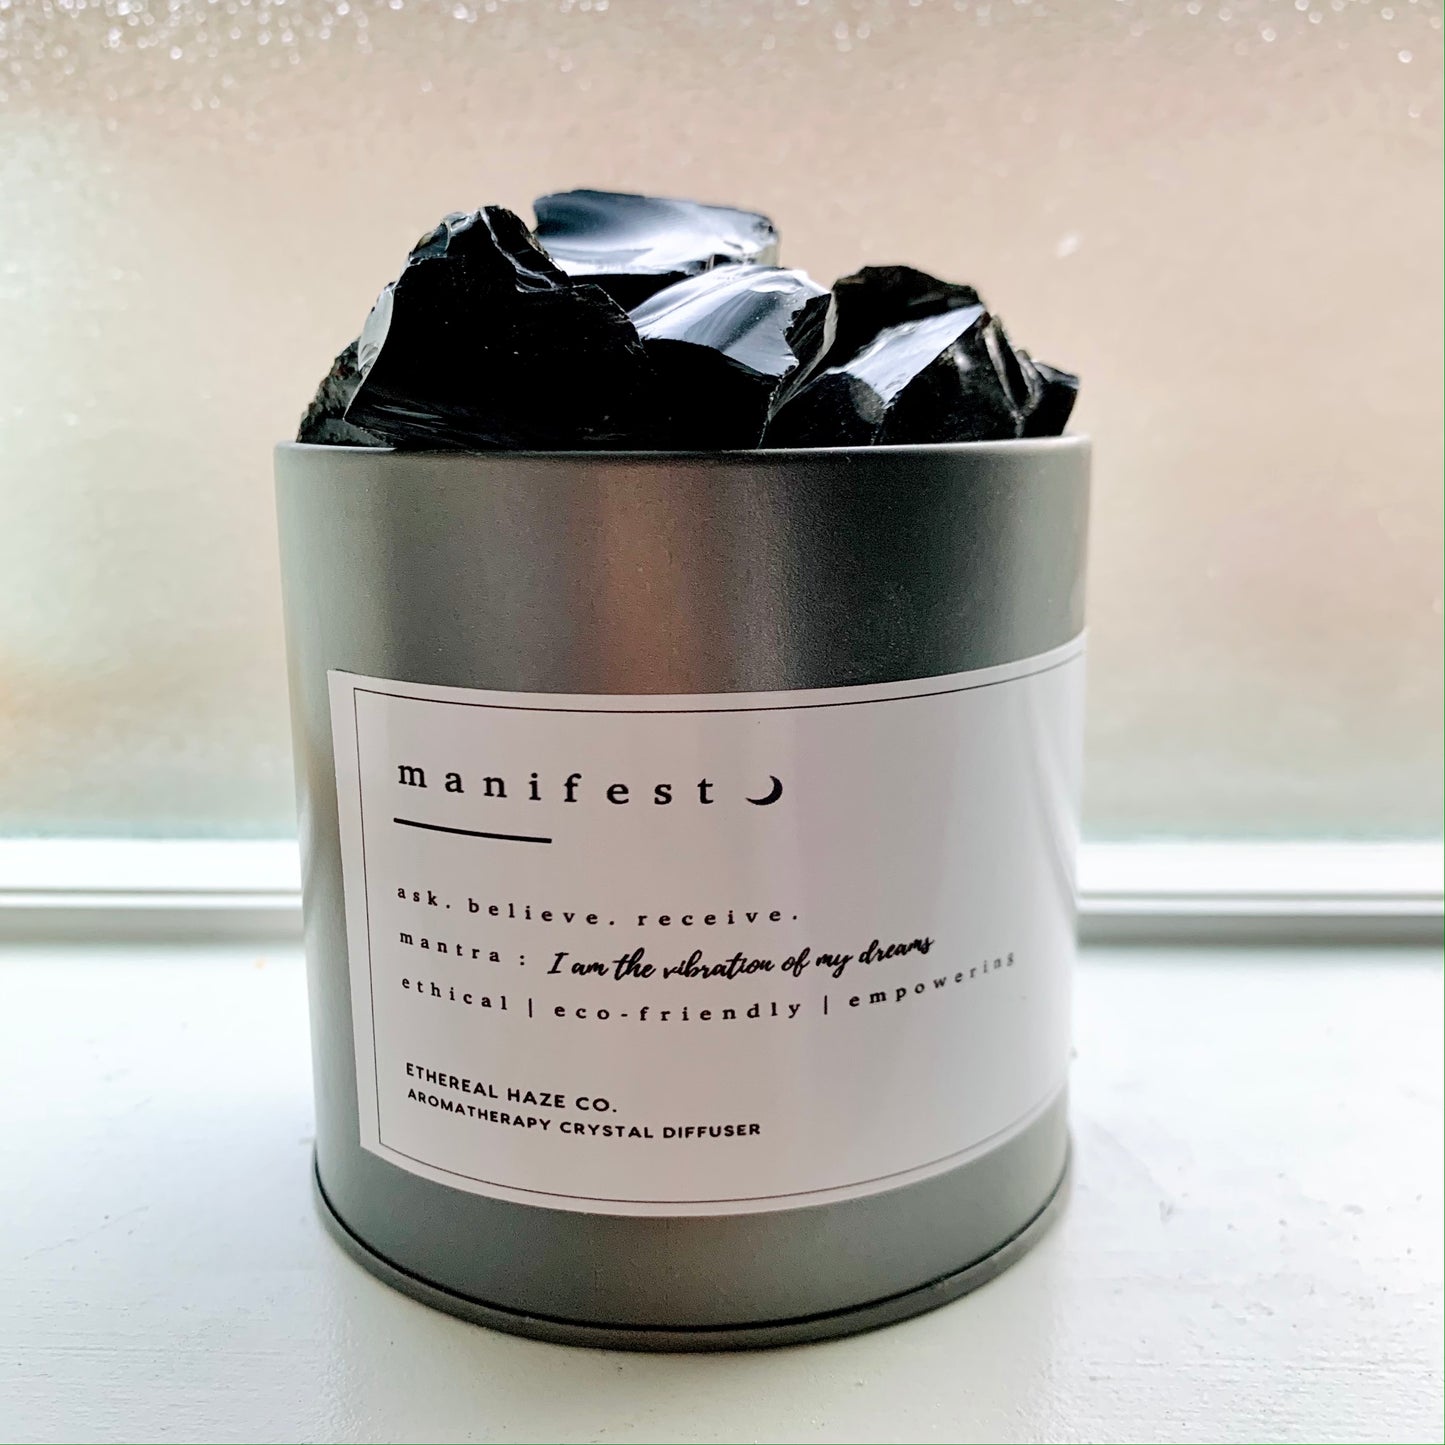 "MANIFEST" Obsidian Aromatherapy Diffuser - Ethereal Haze